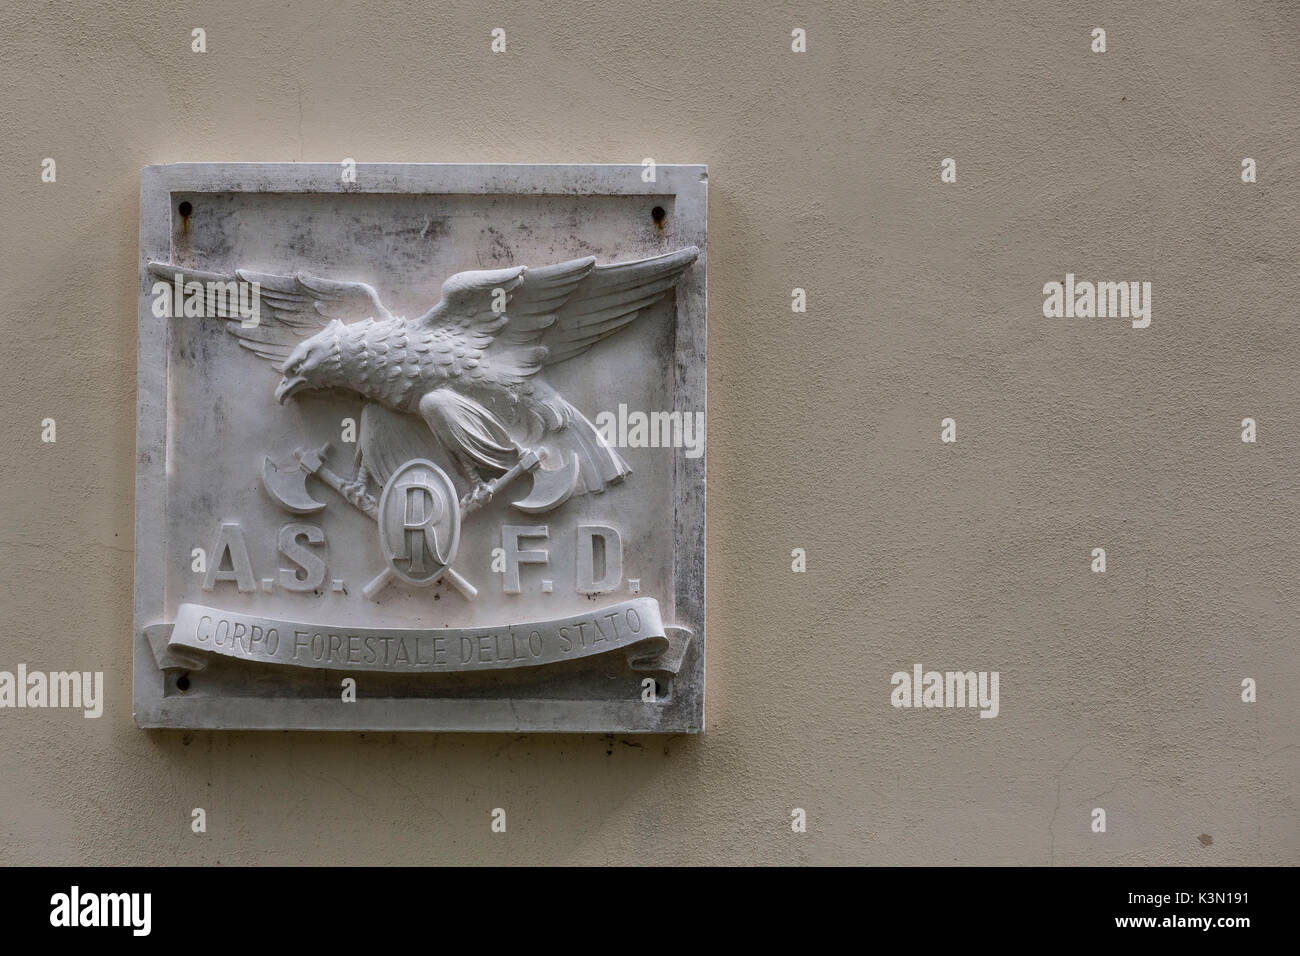 Marble bas-relief with the old symbol of the State Forestry Corps, with the letters A.S.F.D. the abbreviation for 'Azienda di Stato delle Foreste Demaniali'. The plaque hangs outside near Case Salet, National Park of the Belluno Dolomites Stock Photo